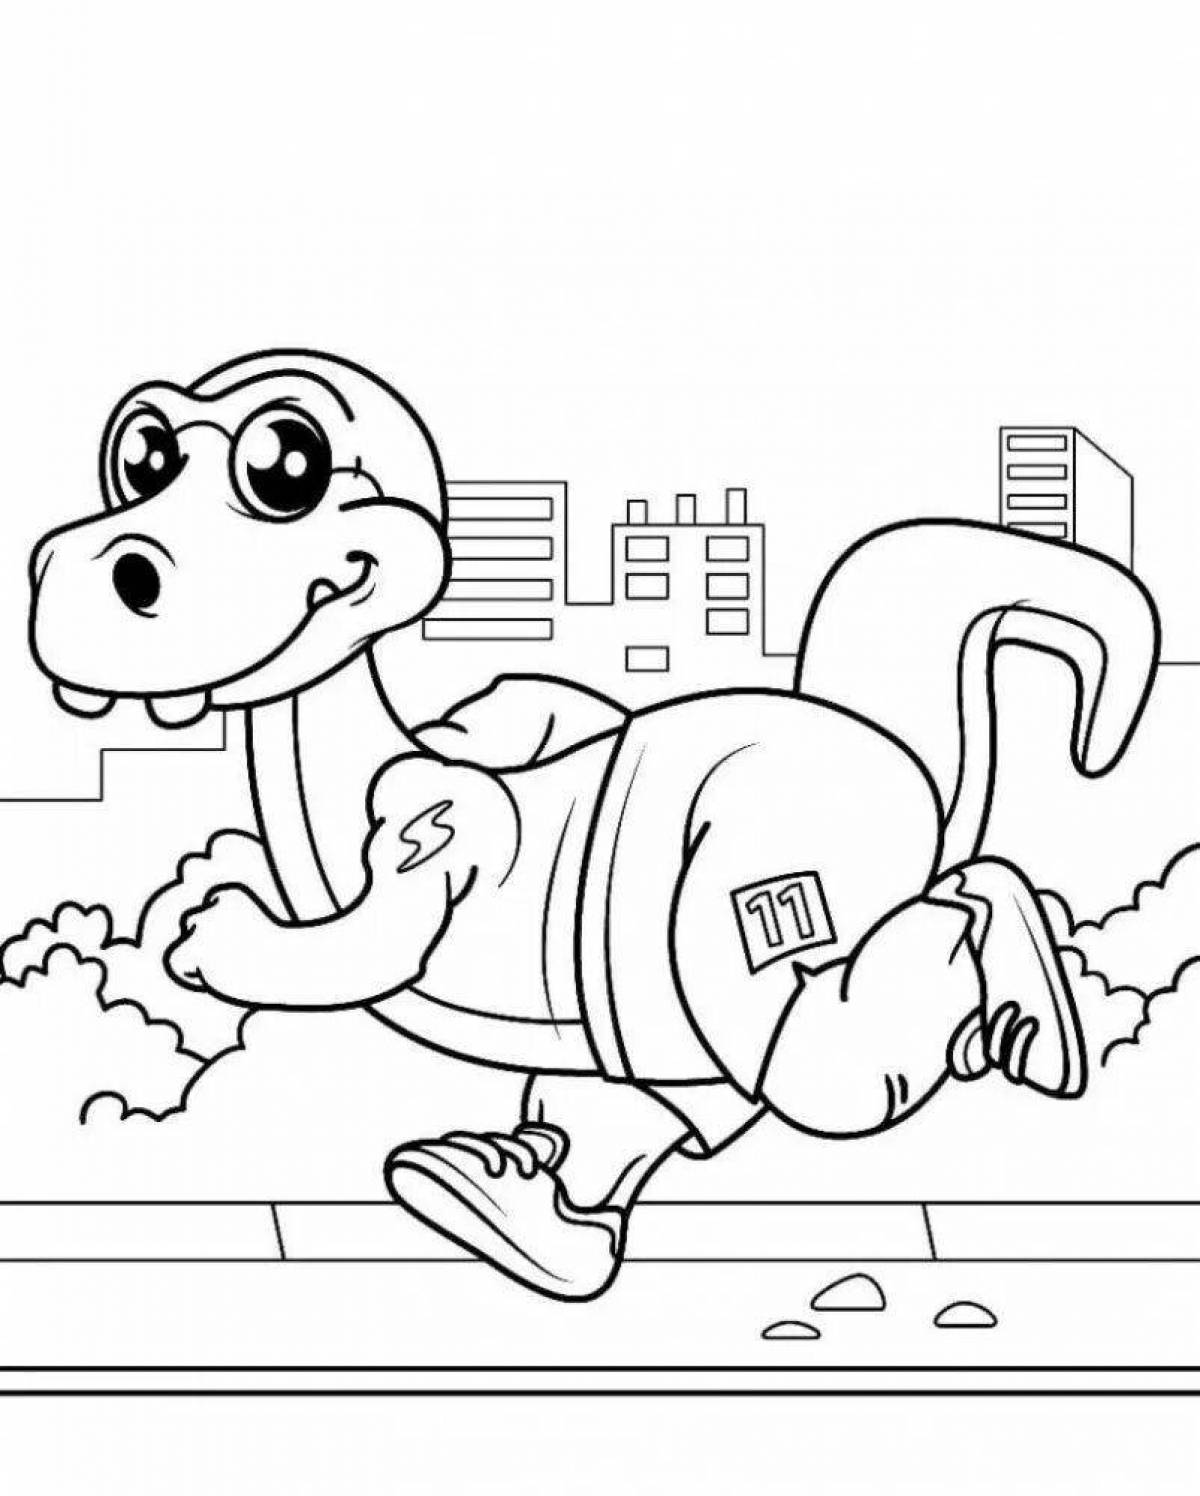 Exquisite dino plant coloring page